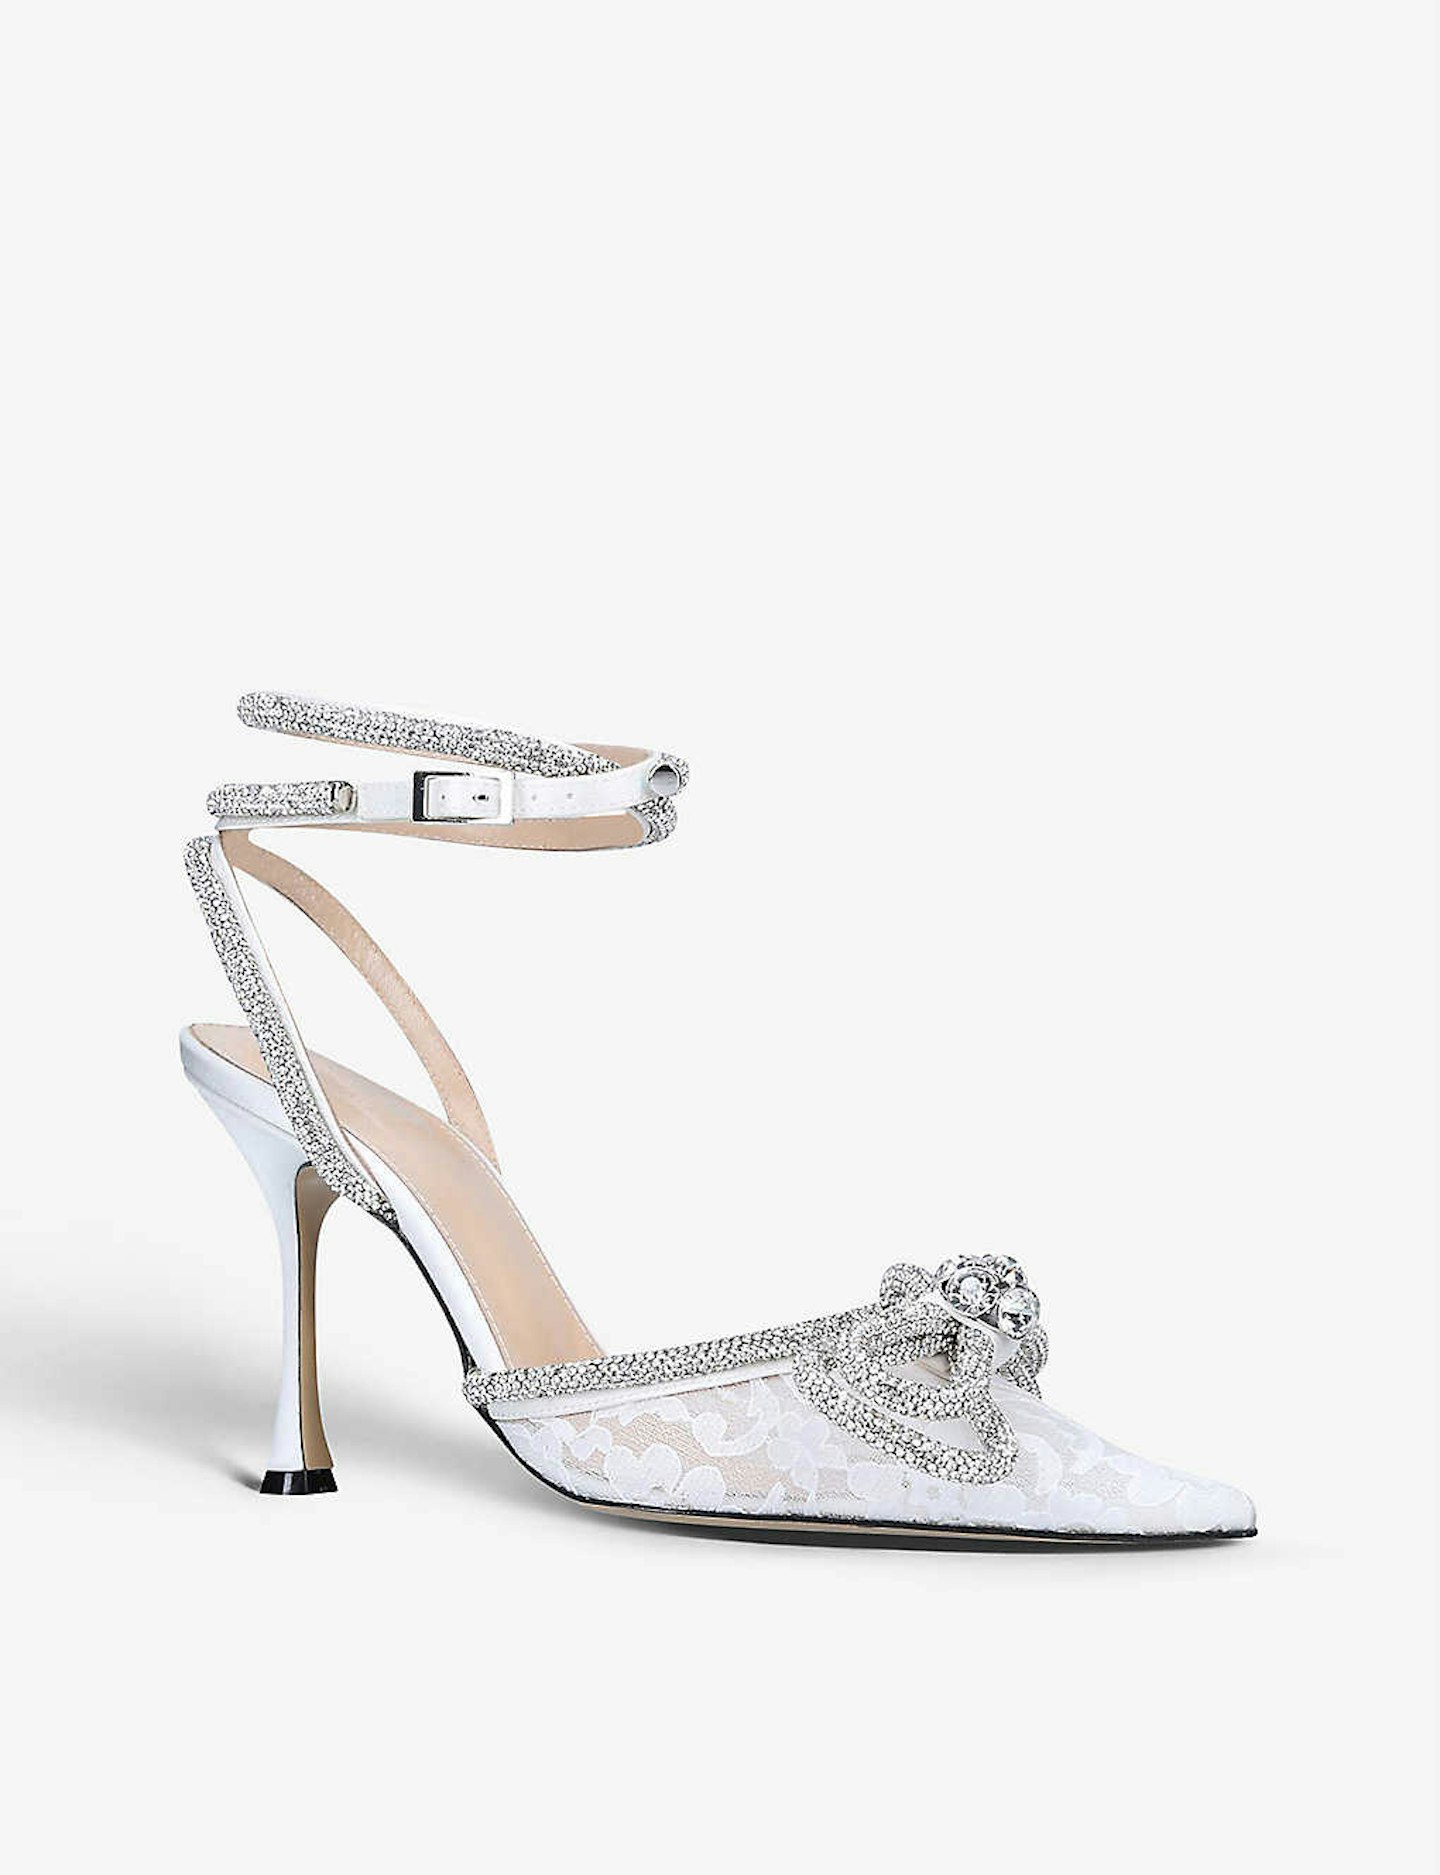 Mach & Mach, Double Bow Crystal-Embellished Satin Heel Mules